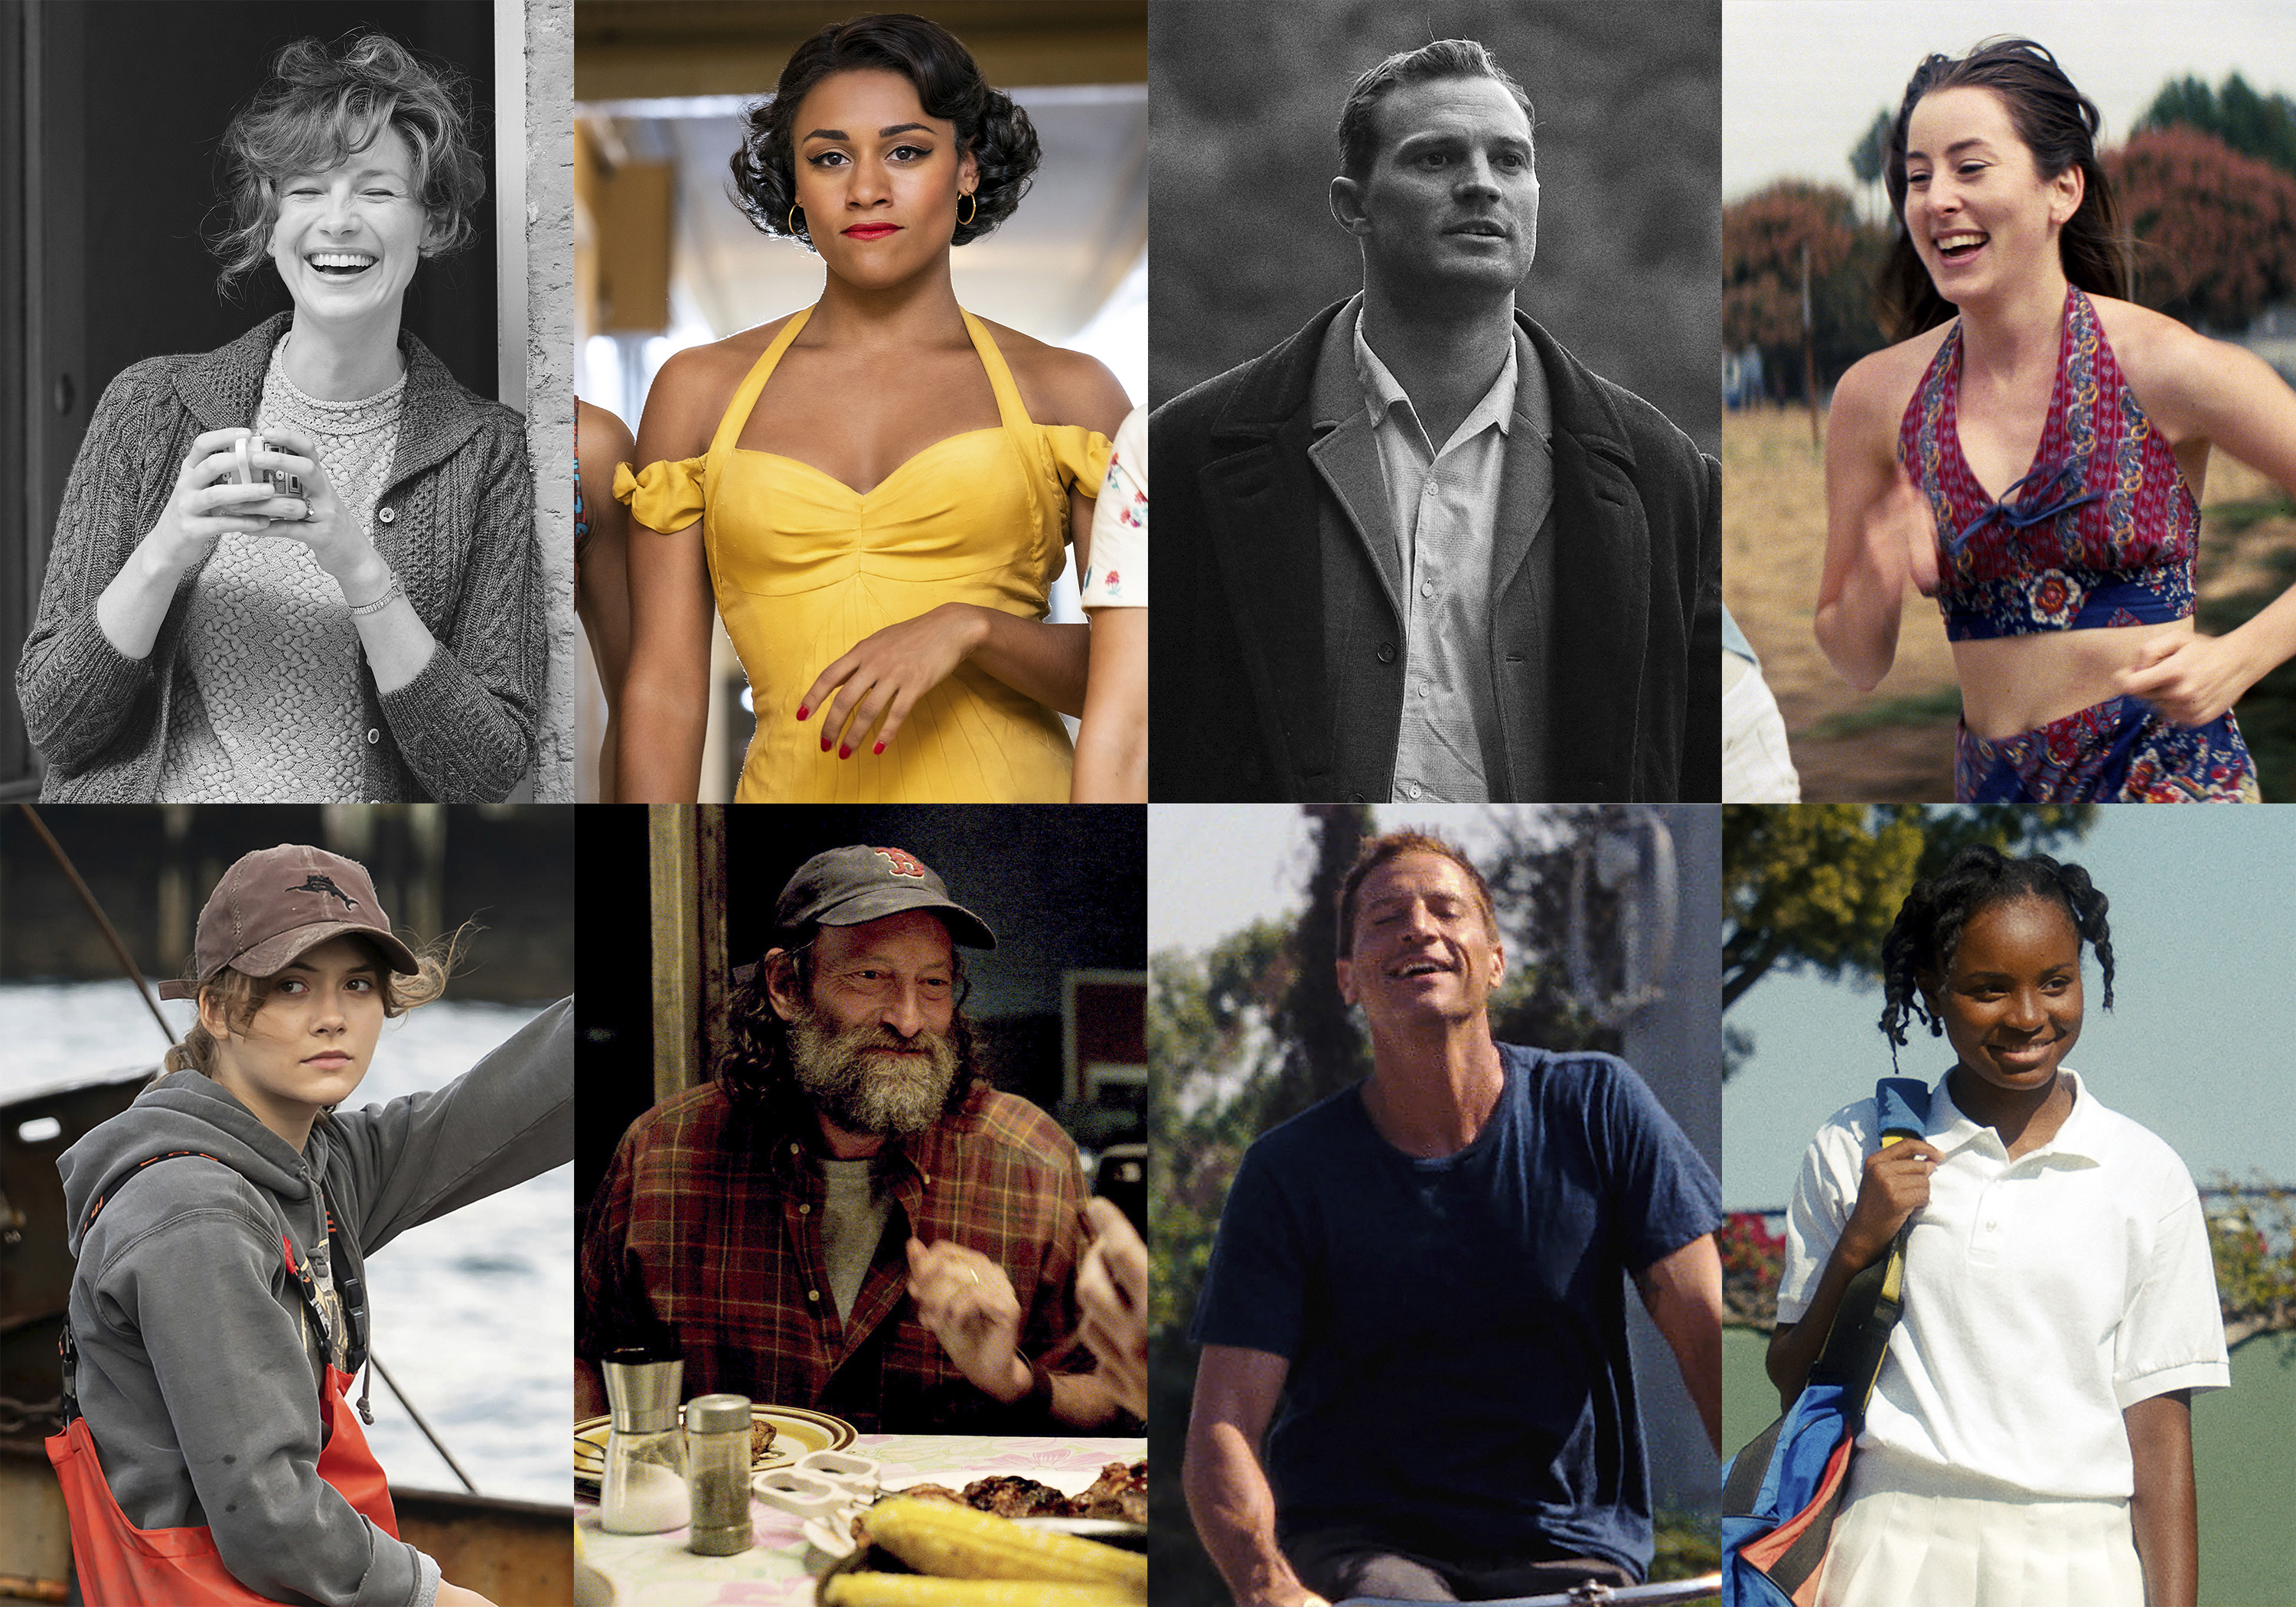 This combination of photos shows honorees for the Virtuosos Award by the 37th Santa Barbara International Film Festival, top row from left, Caitriona Balfe in Belfast, Ariana Debose in West Side Story, Jamie Dornan in Belfast, Alana Haim in Licorice Pizza, bottom row from left, Emilia Jones in CODA, Troy Kotsur in CODA, Simon Rex in Red Rocket, and Saniyya Sidney in King Richard